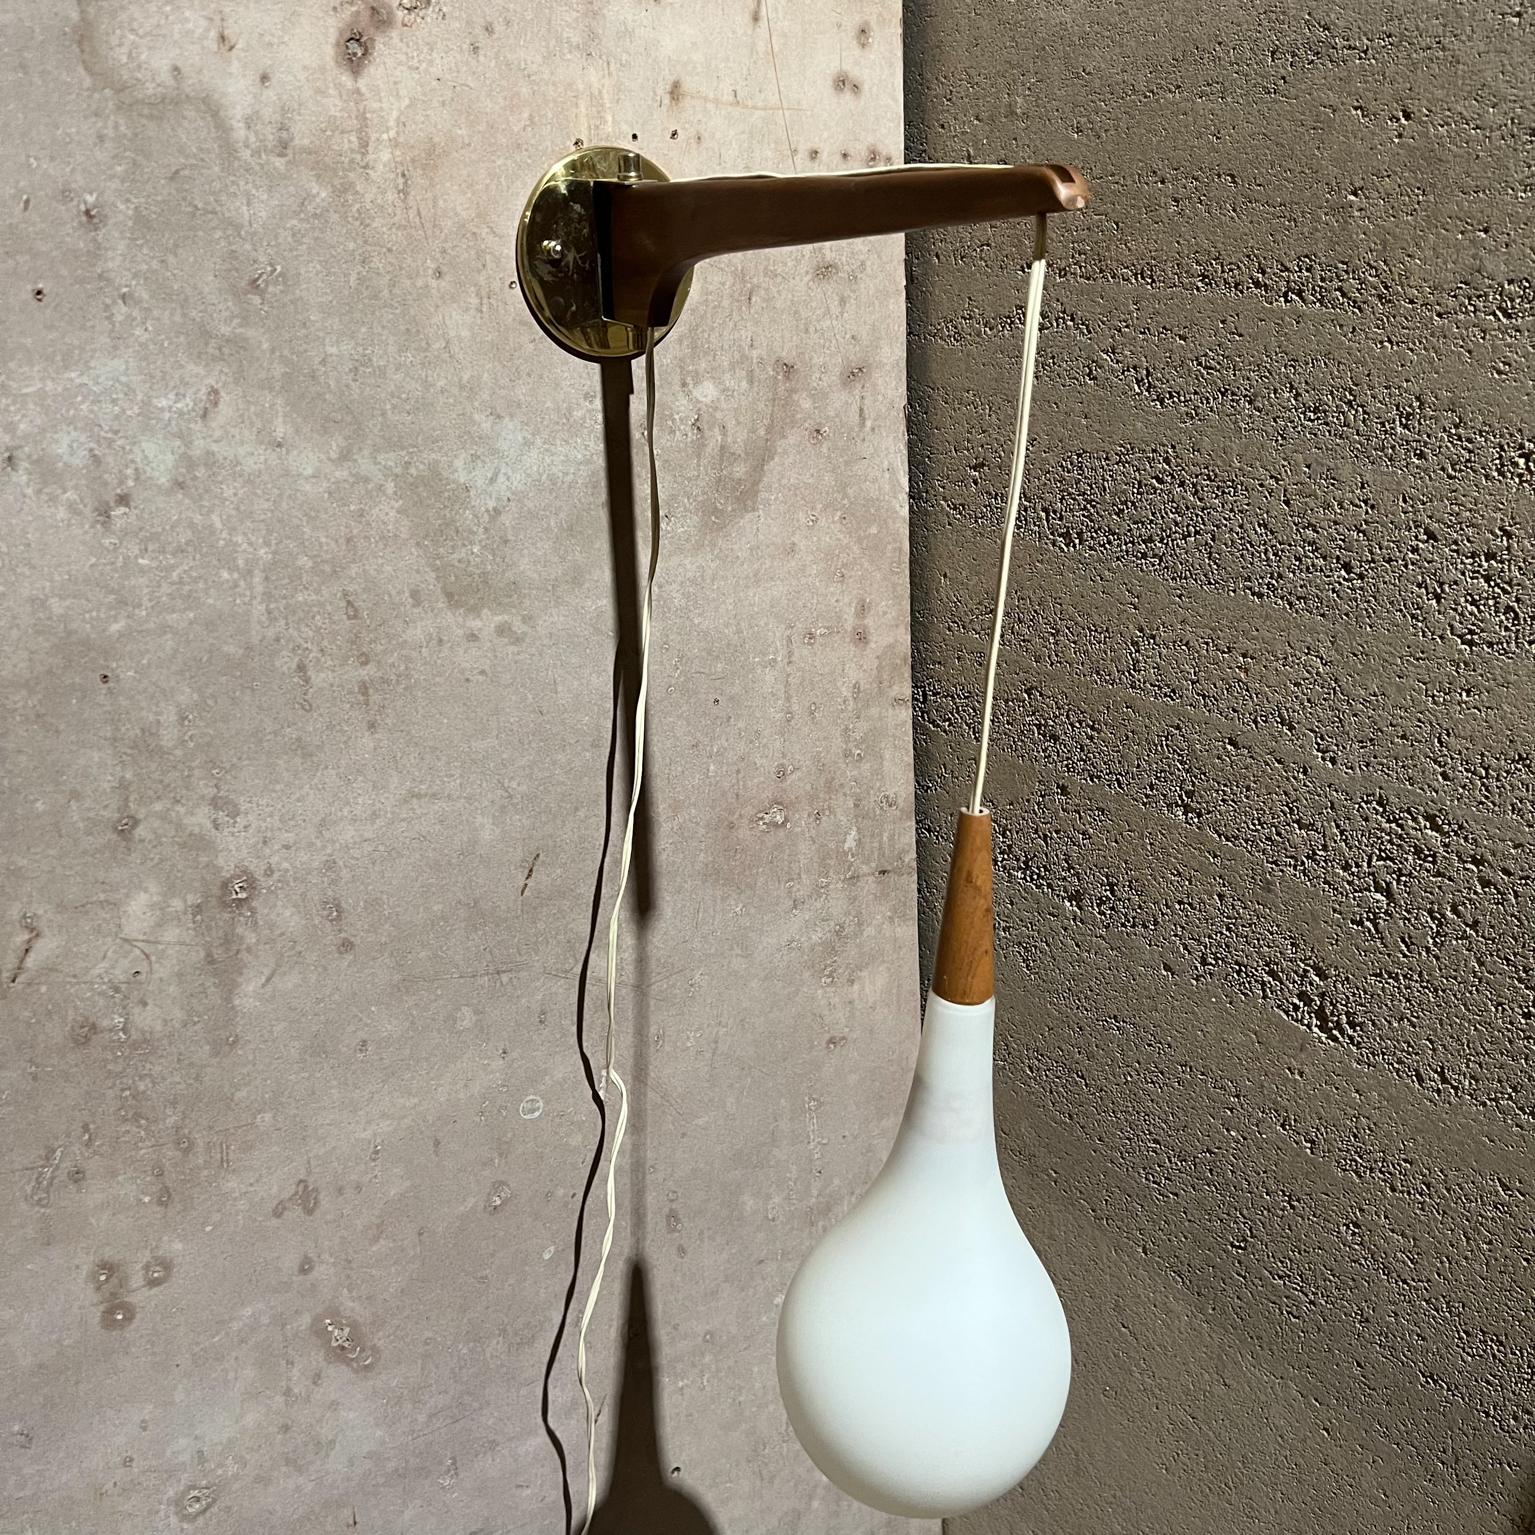 1970s Modern wall sconce pendant light Scandinavian Teakwood & Frosted Glass
Unmarked, in the style of Finnish Lisa Johansson-Pape.
Adjustable height and swiveling angle.
16 d x 5 w x 14.5 h adjustable
Preowned original vintage condition, see